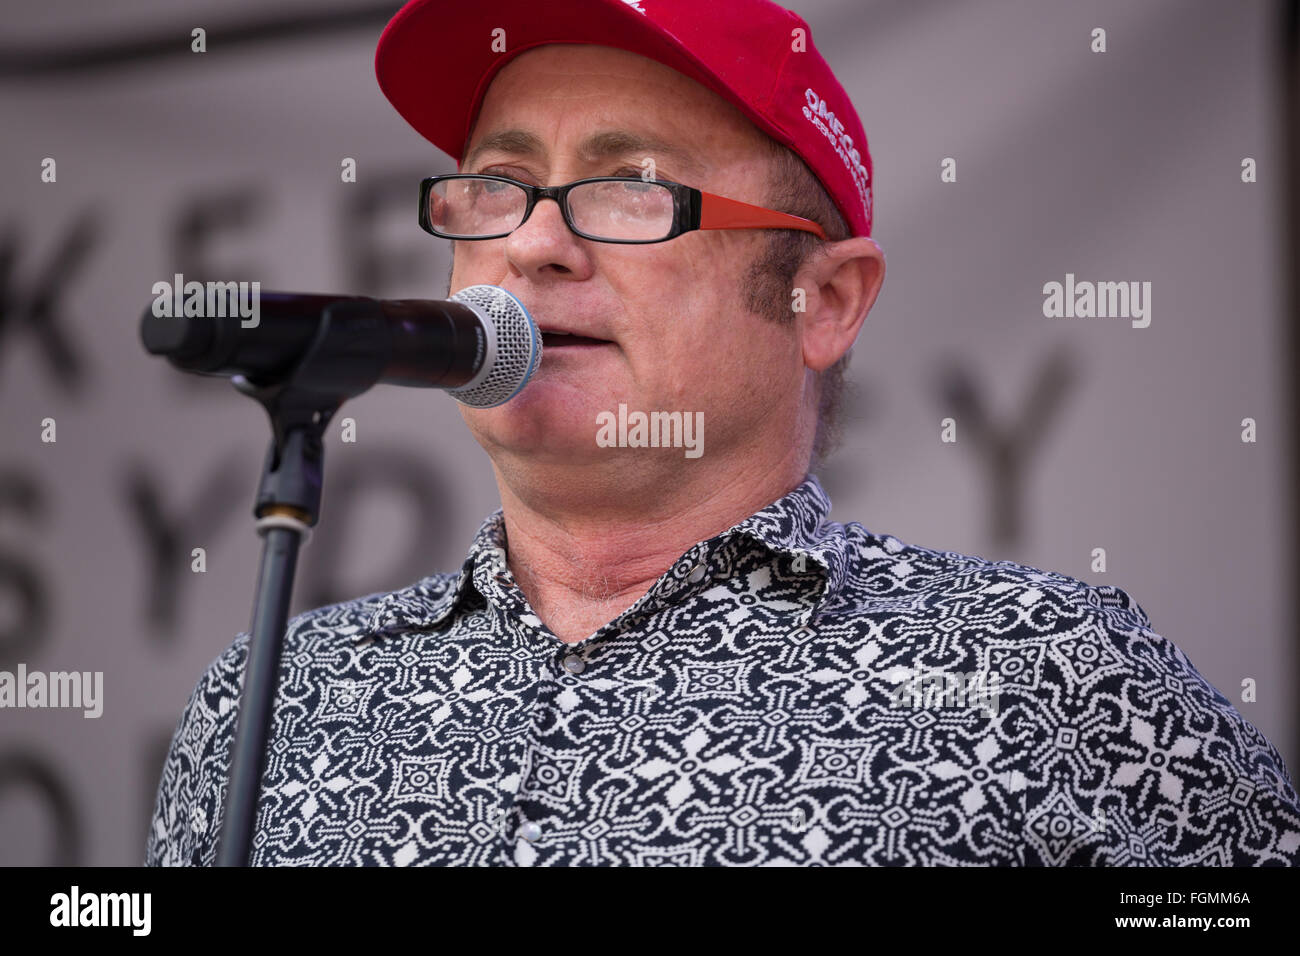 Sydney, Australia. 21st Feb, 2016. Dave Faulkner from iconic Australian band Hoodoo Gurus described how his musical career was forged in the late hours now prohibited in Sydney. © Richard Ashen/Pacific Press/Alamy Live News Stock Photo